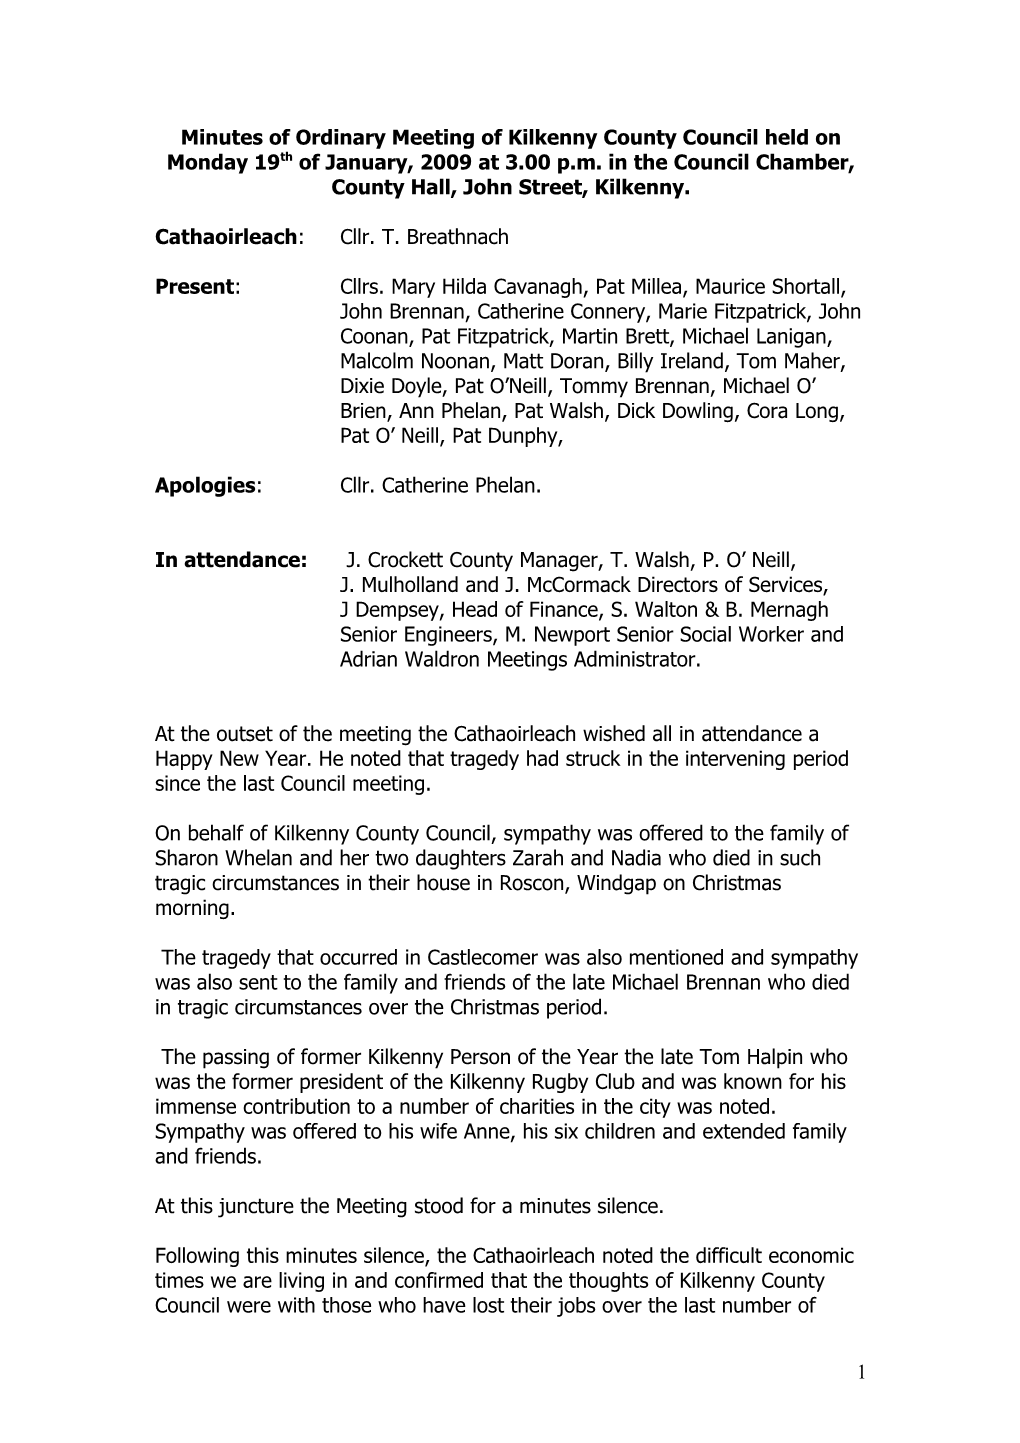 Minutes of Ordinary Meeting of Kilkenny County Council Held on Monday 15Th December, 2008 at 3